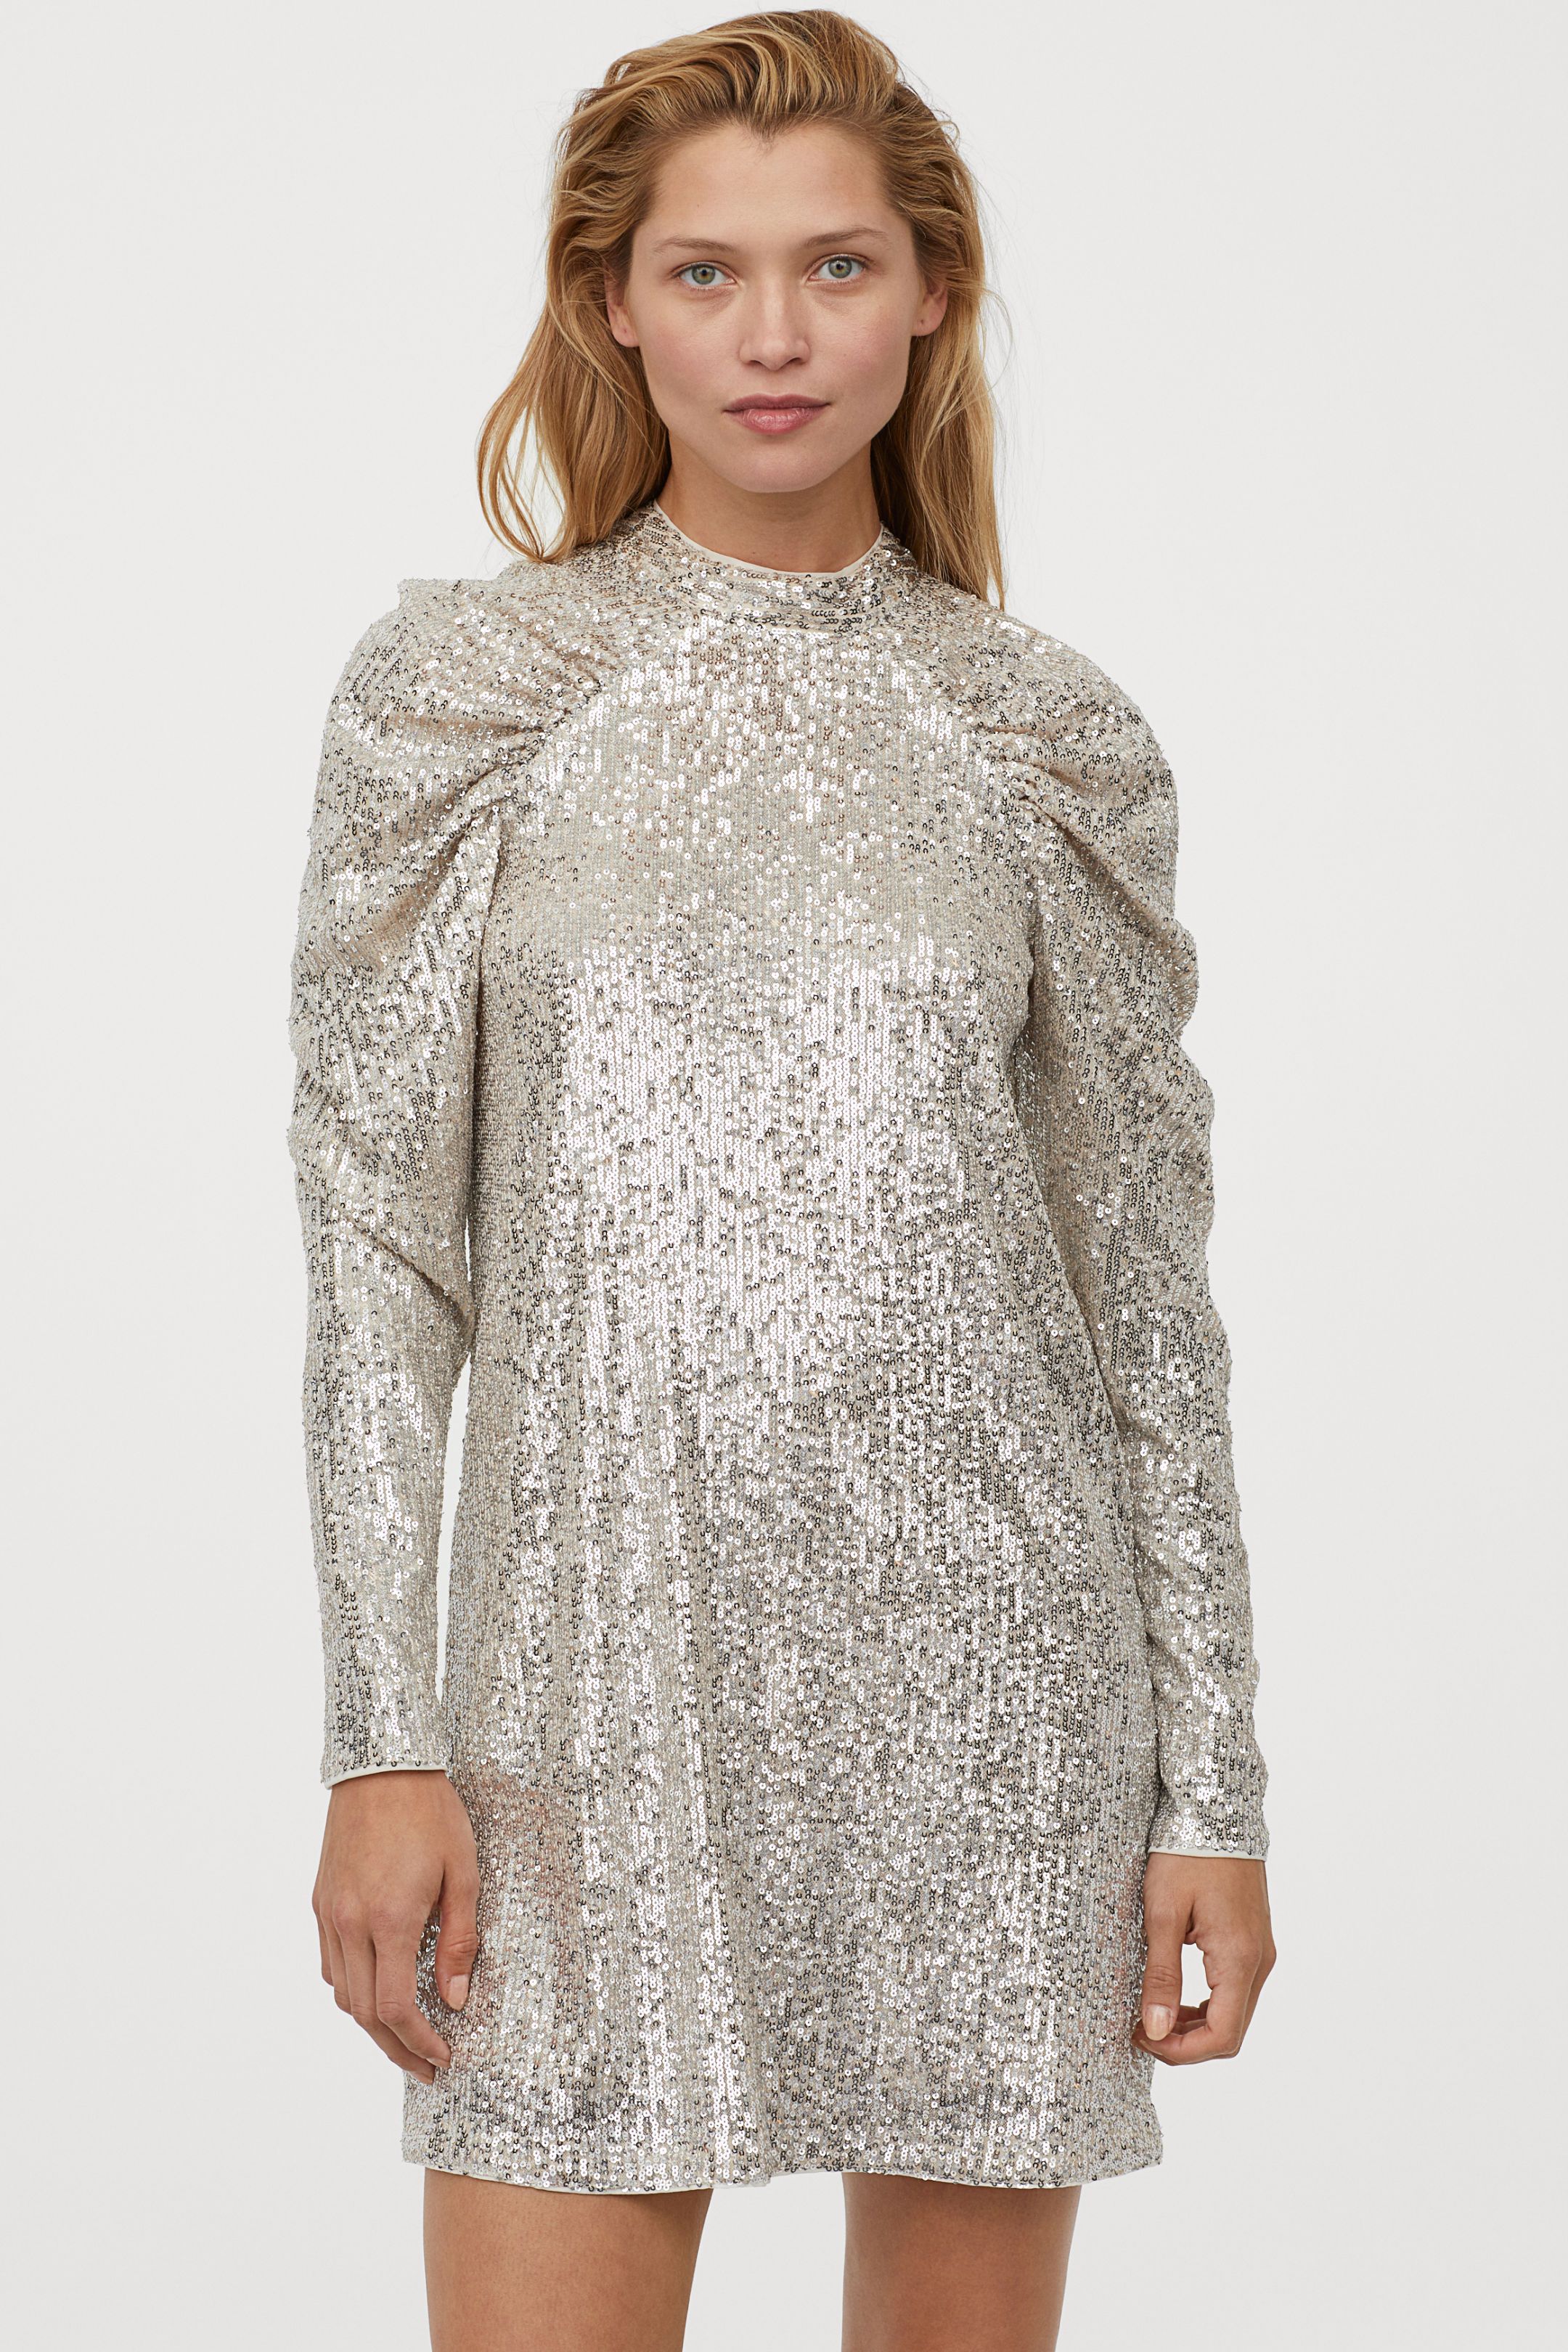 h and m silver dress